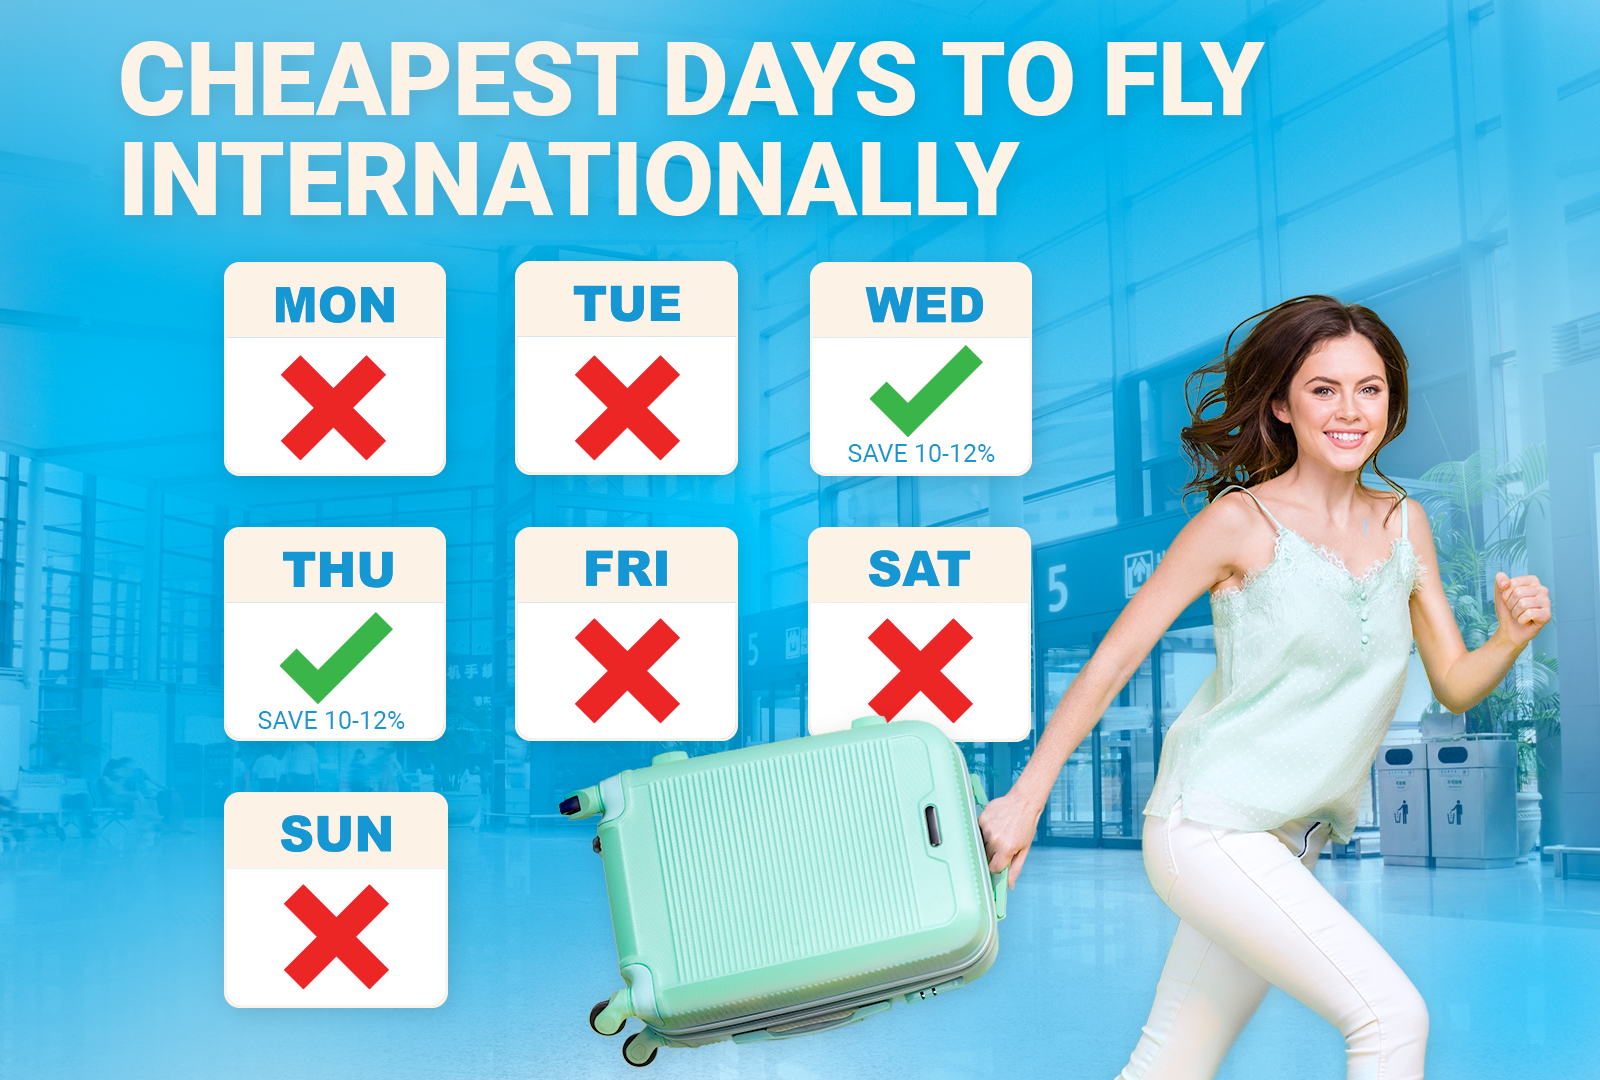 Image of a woman running with a suitcase next to a summary of the cheapest days to fly internationally